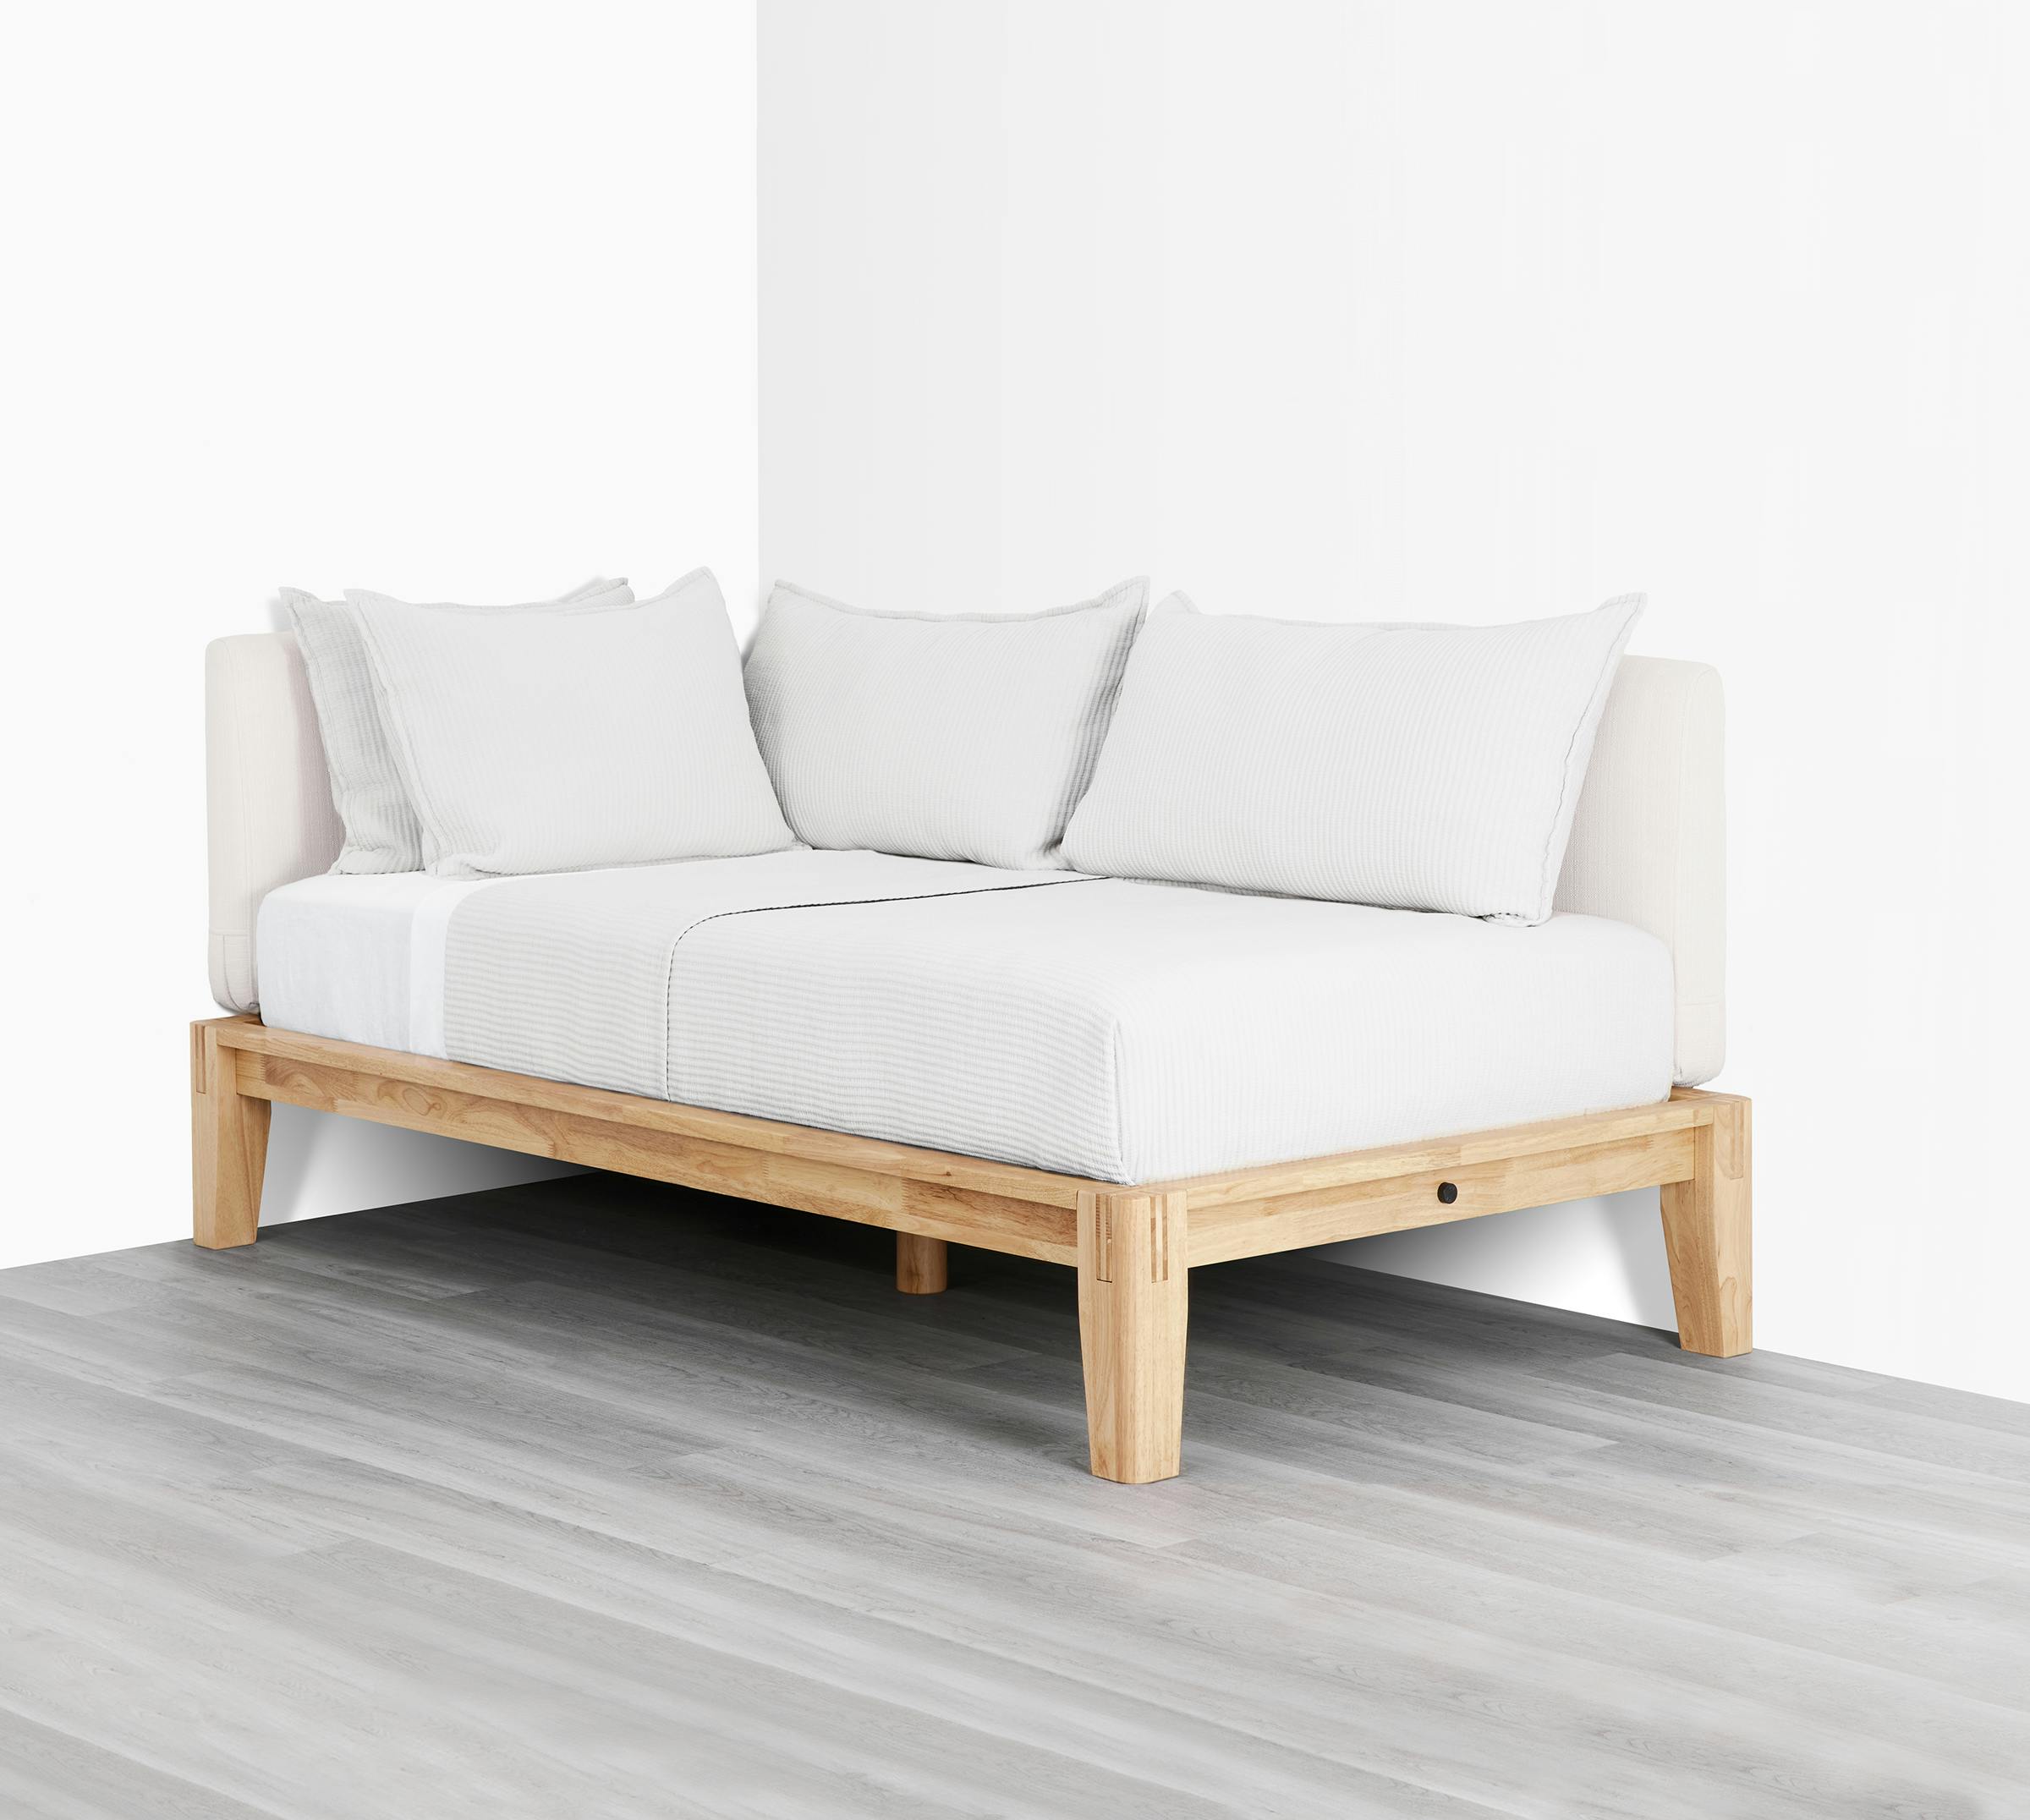 The Bed (Daybed / Natural / Light Linen) - Diagonal 2